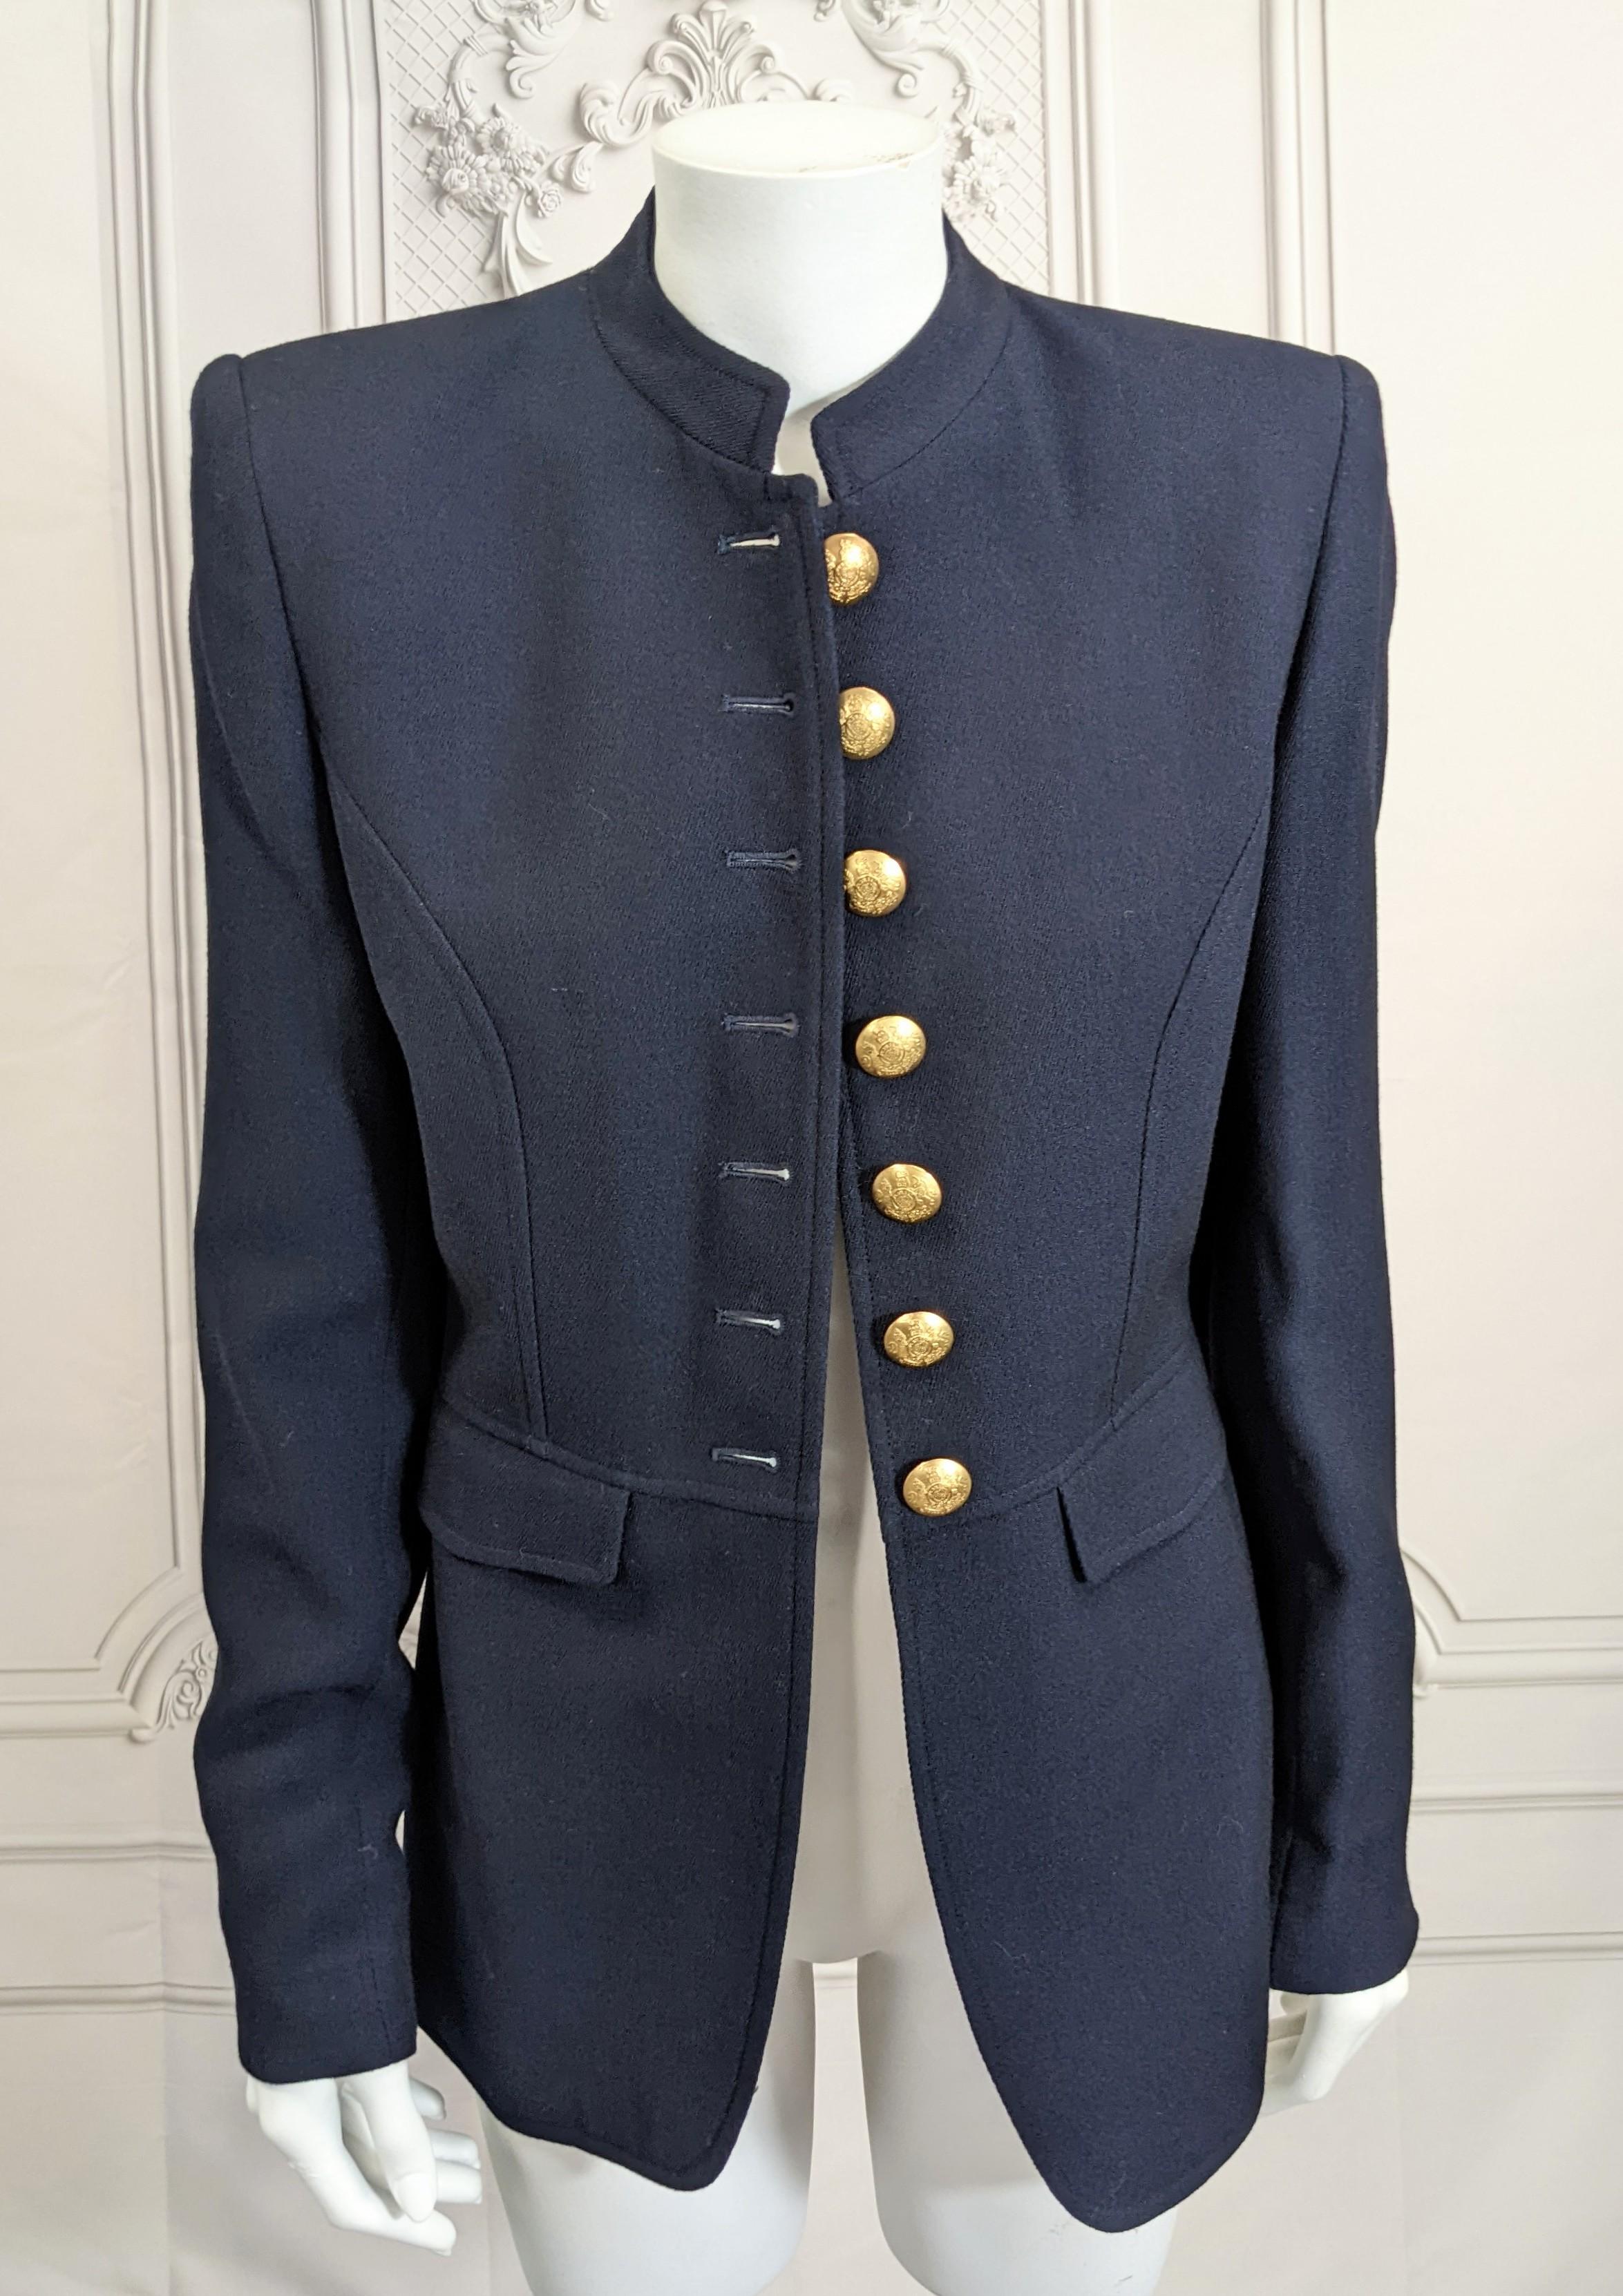 Ralph Lauren Military Style Jacket In Excellent Condition For Sale In New York, NY